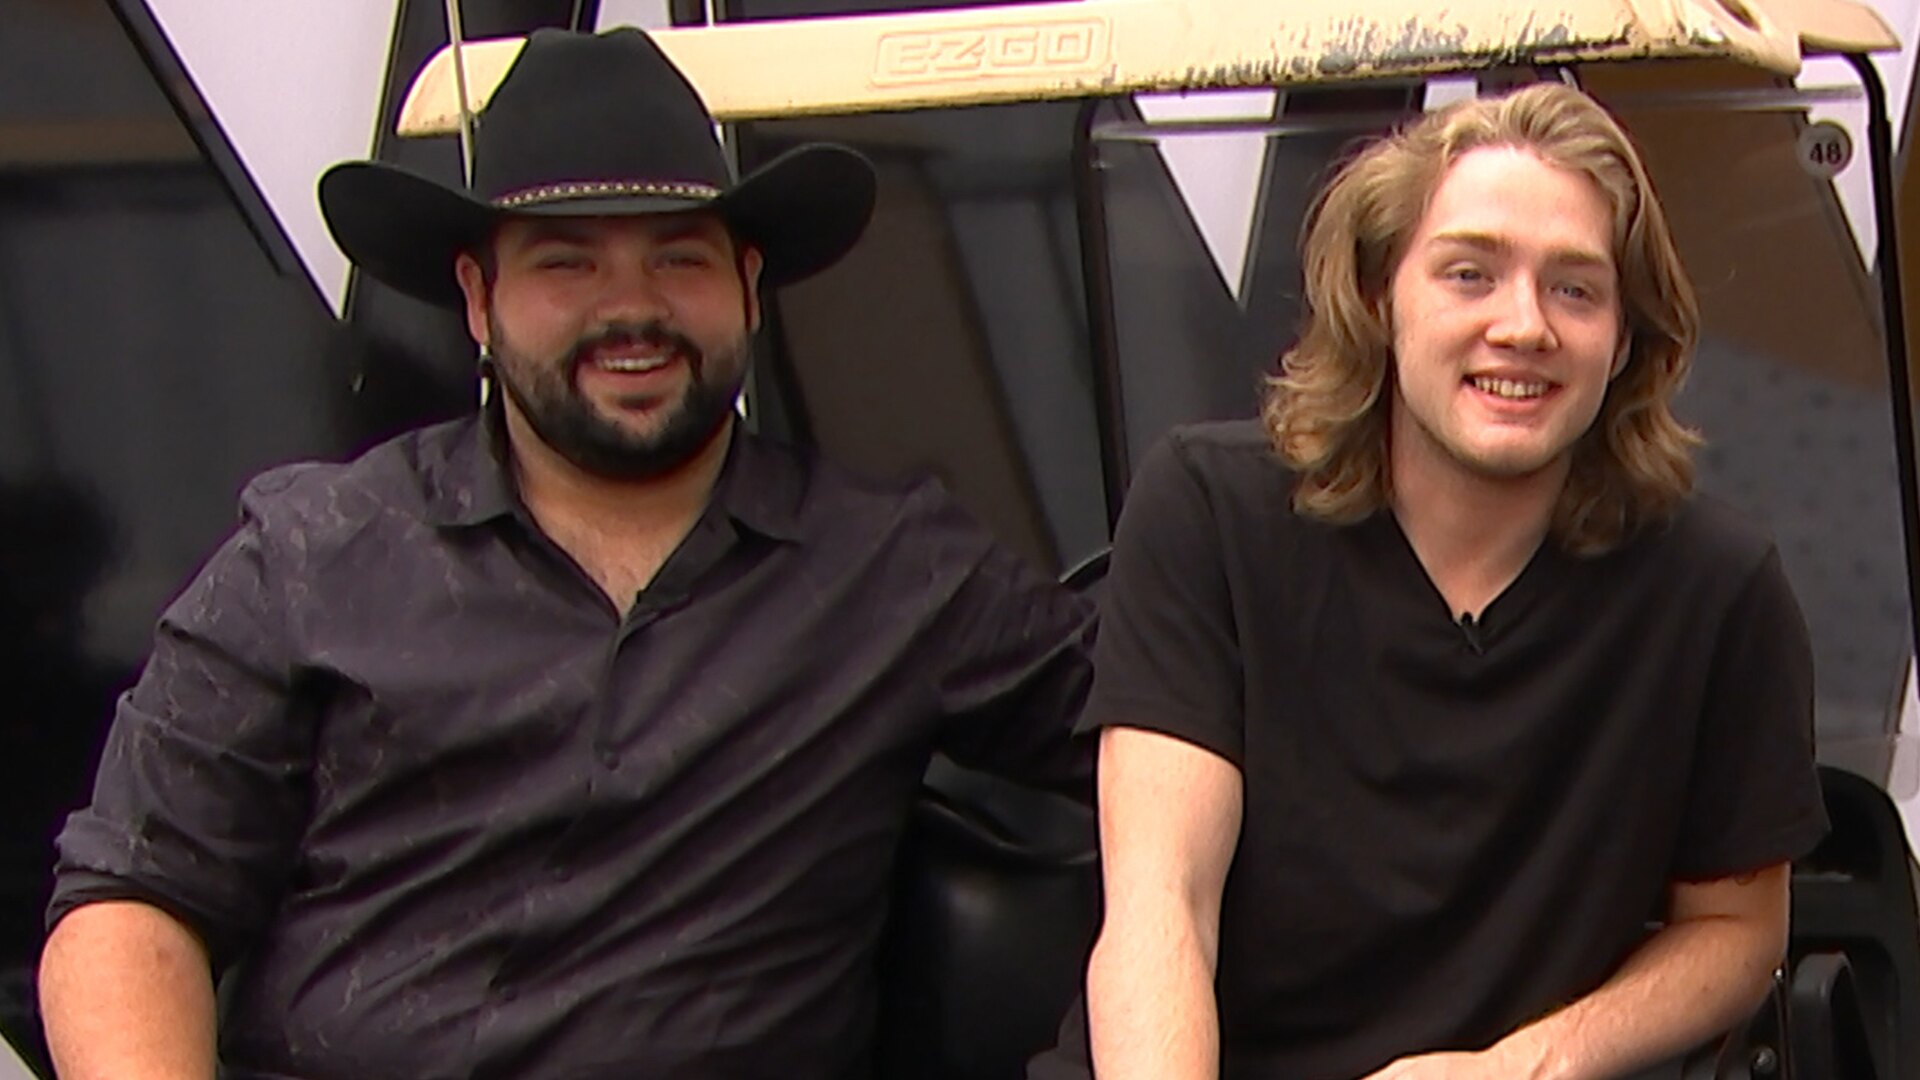 Watch Access Interview The Voice Teamblake S Andrew Sevener And Carter Lloyd Horne Fiercely